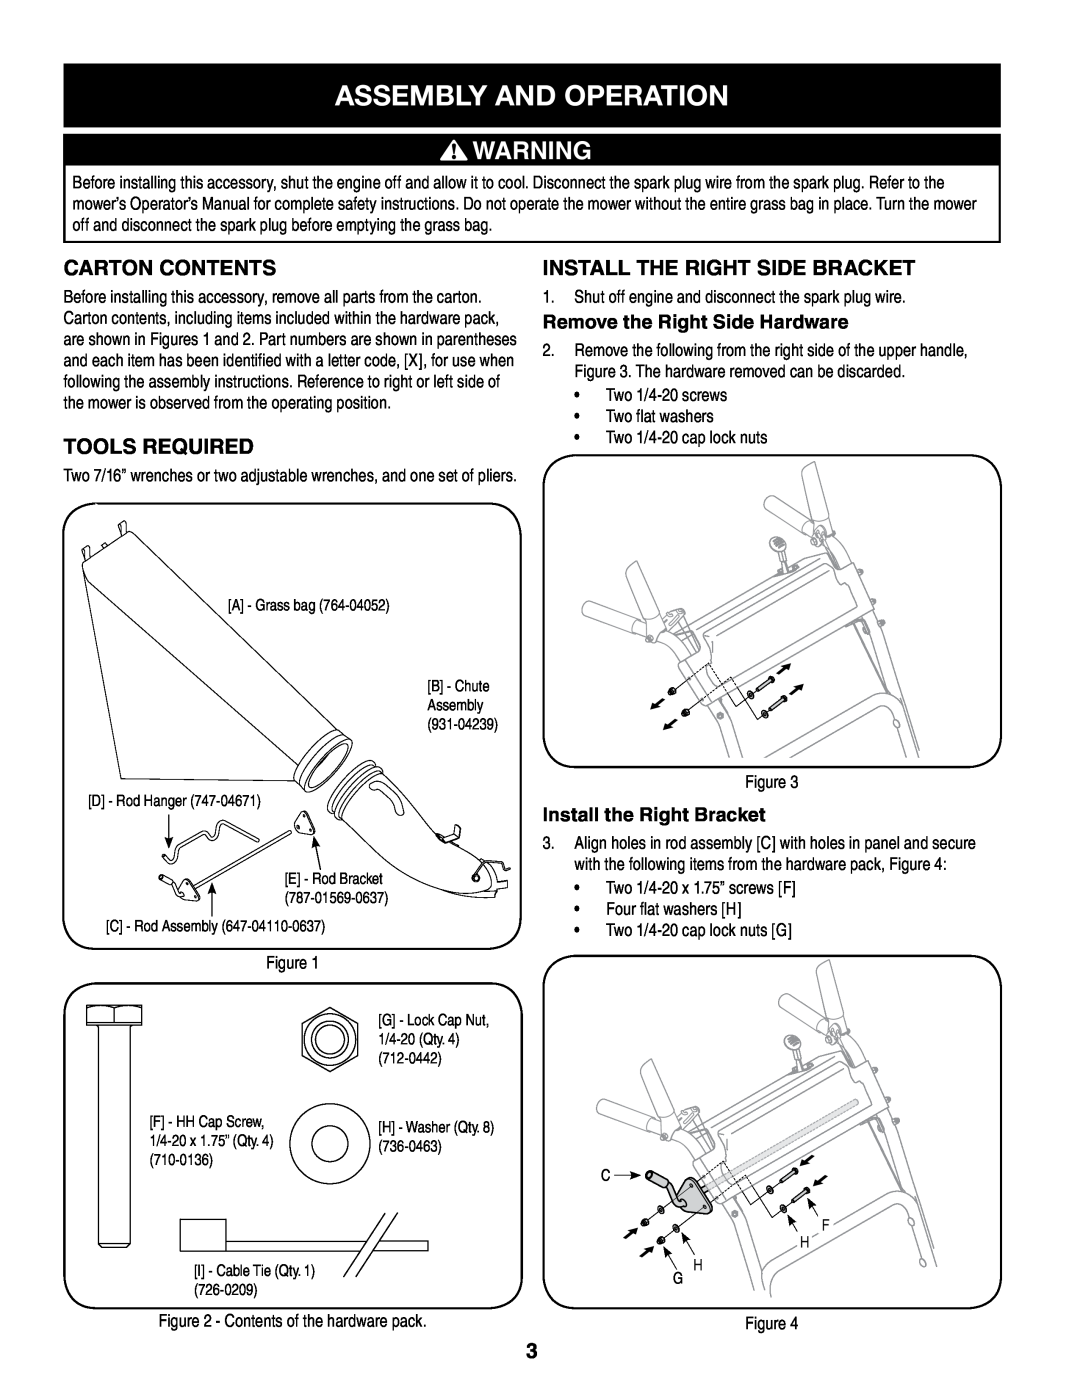 Sears 33731 manual Assembly And Operation, Carton CONTENTS, TOOLS required, Install the RIGHT Side Bracket 